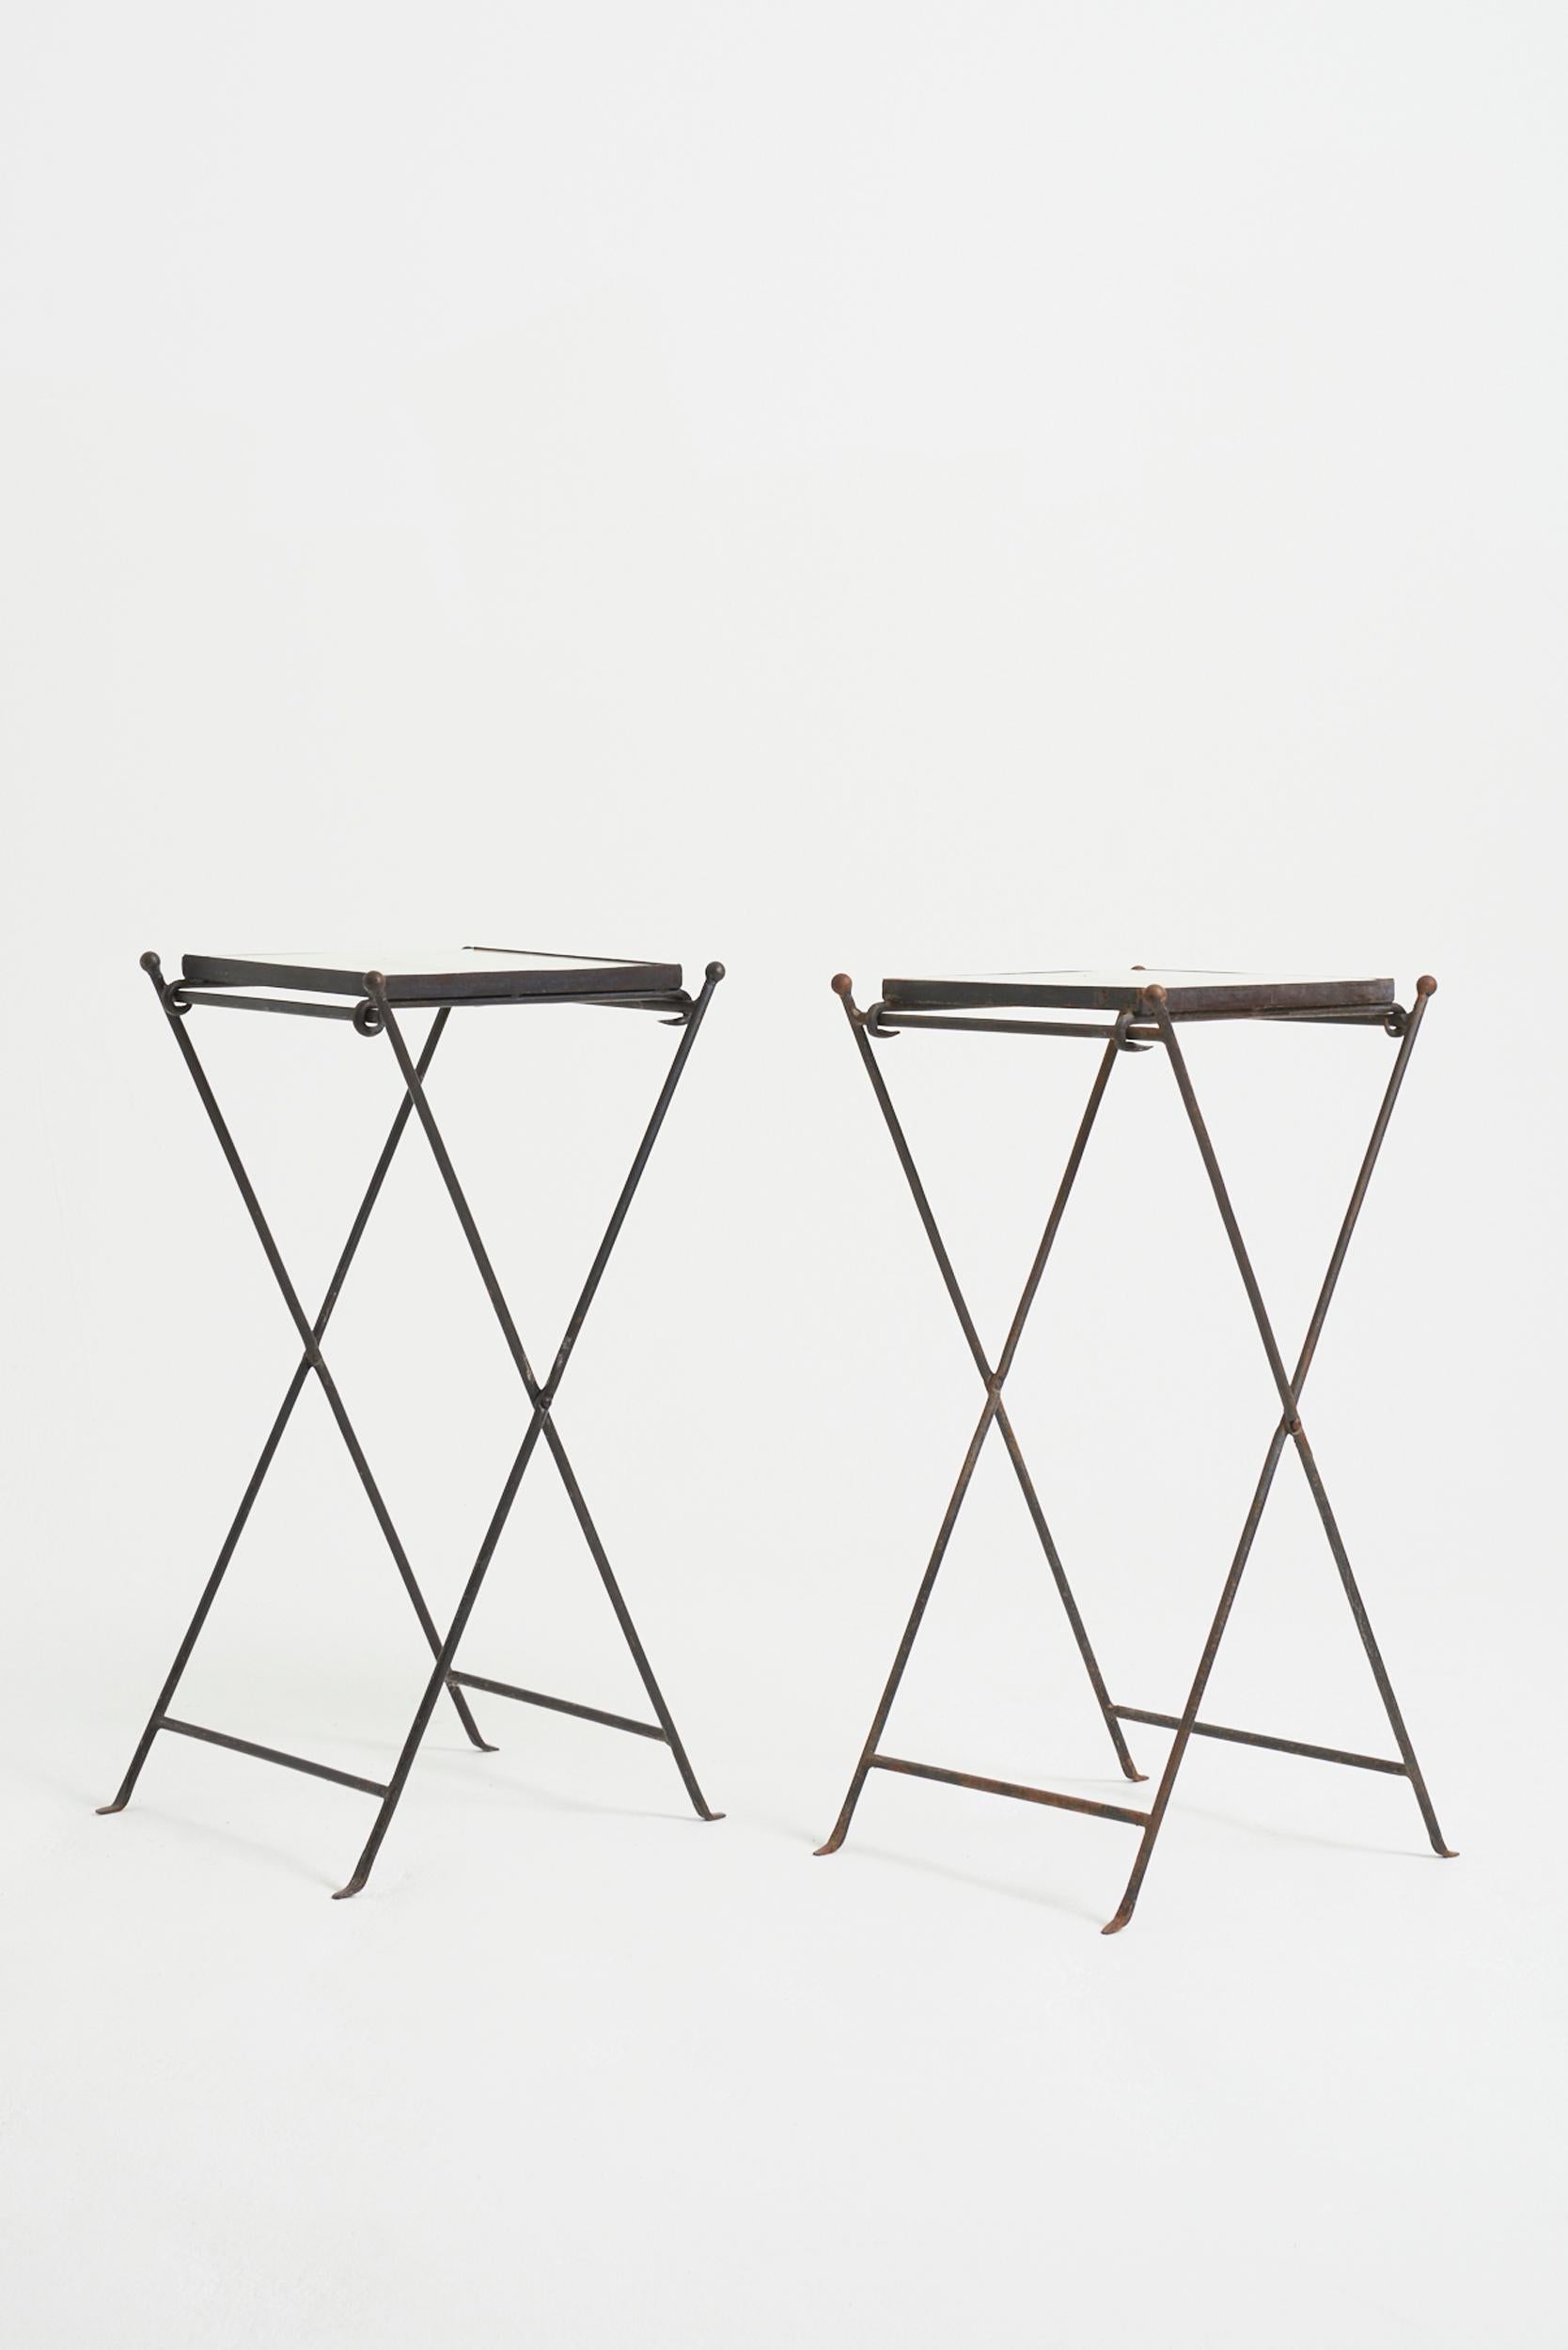 A pair of tall marble top black iron folding tables.
France, 1950s
79 cm high by 45.5 cm wide by 35.5 cm depth